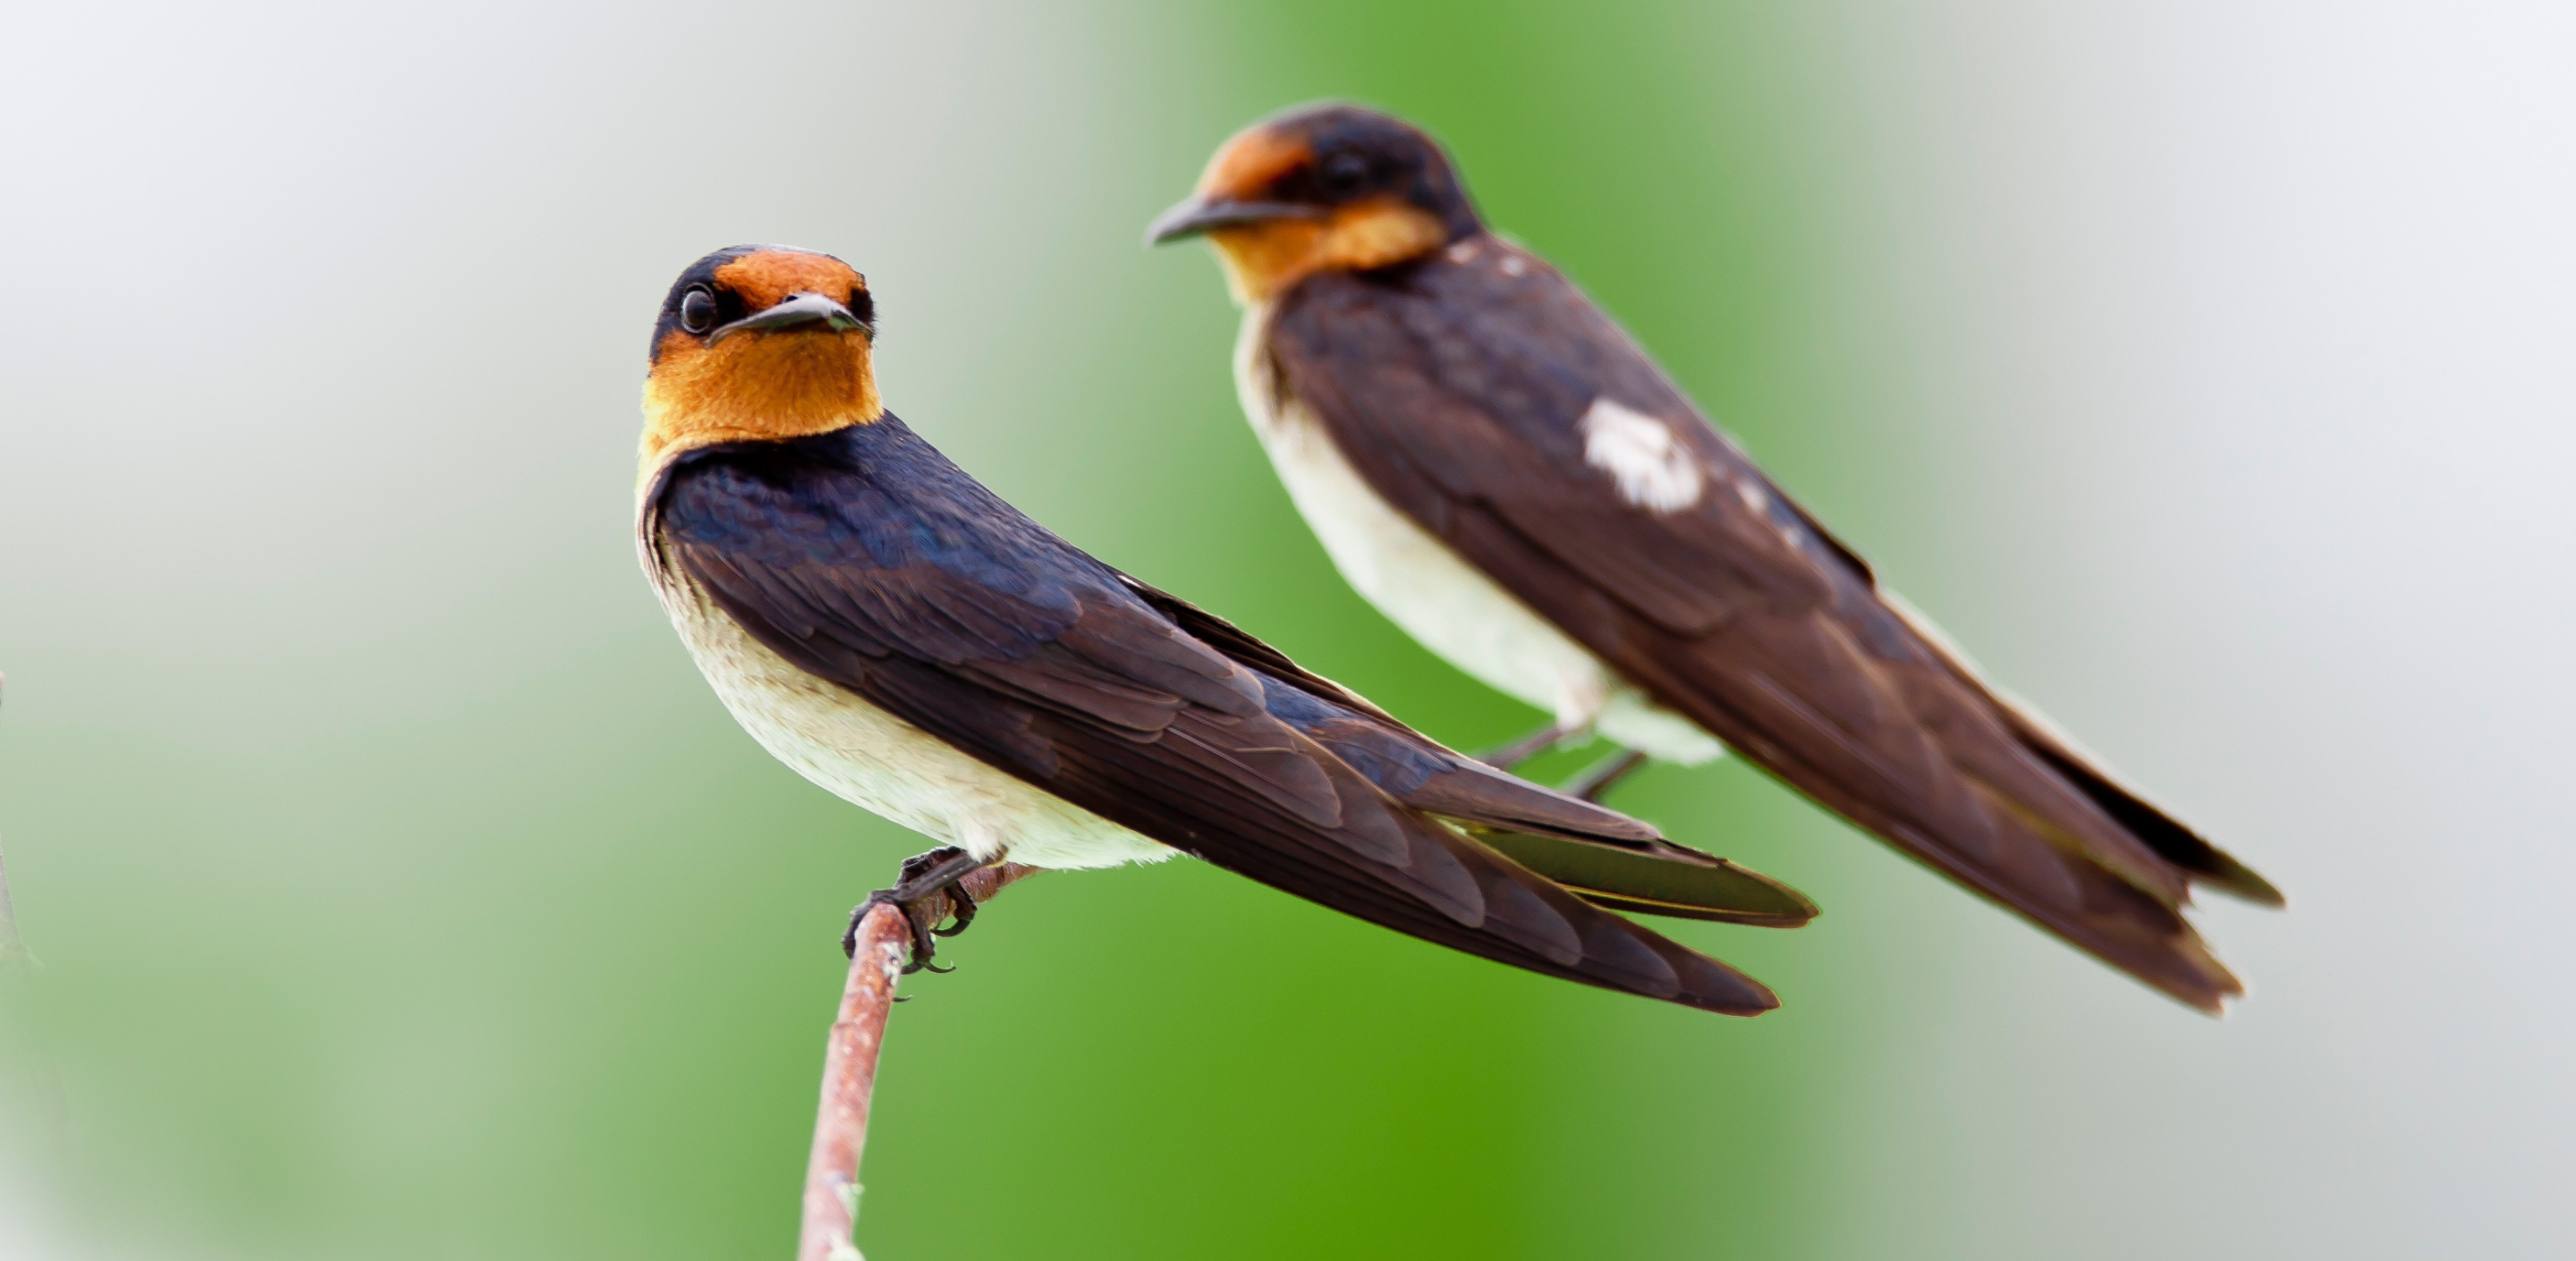 The Symbolic Meaning of the Swallow in Portuguese Culture